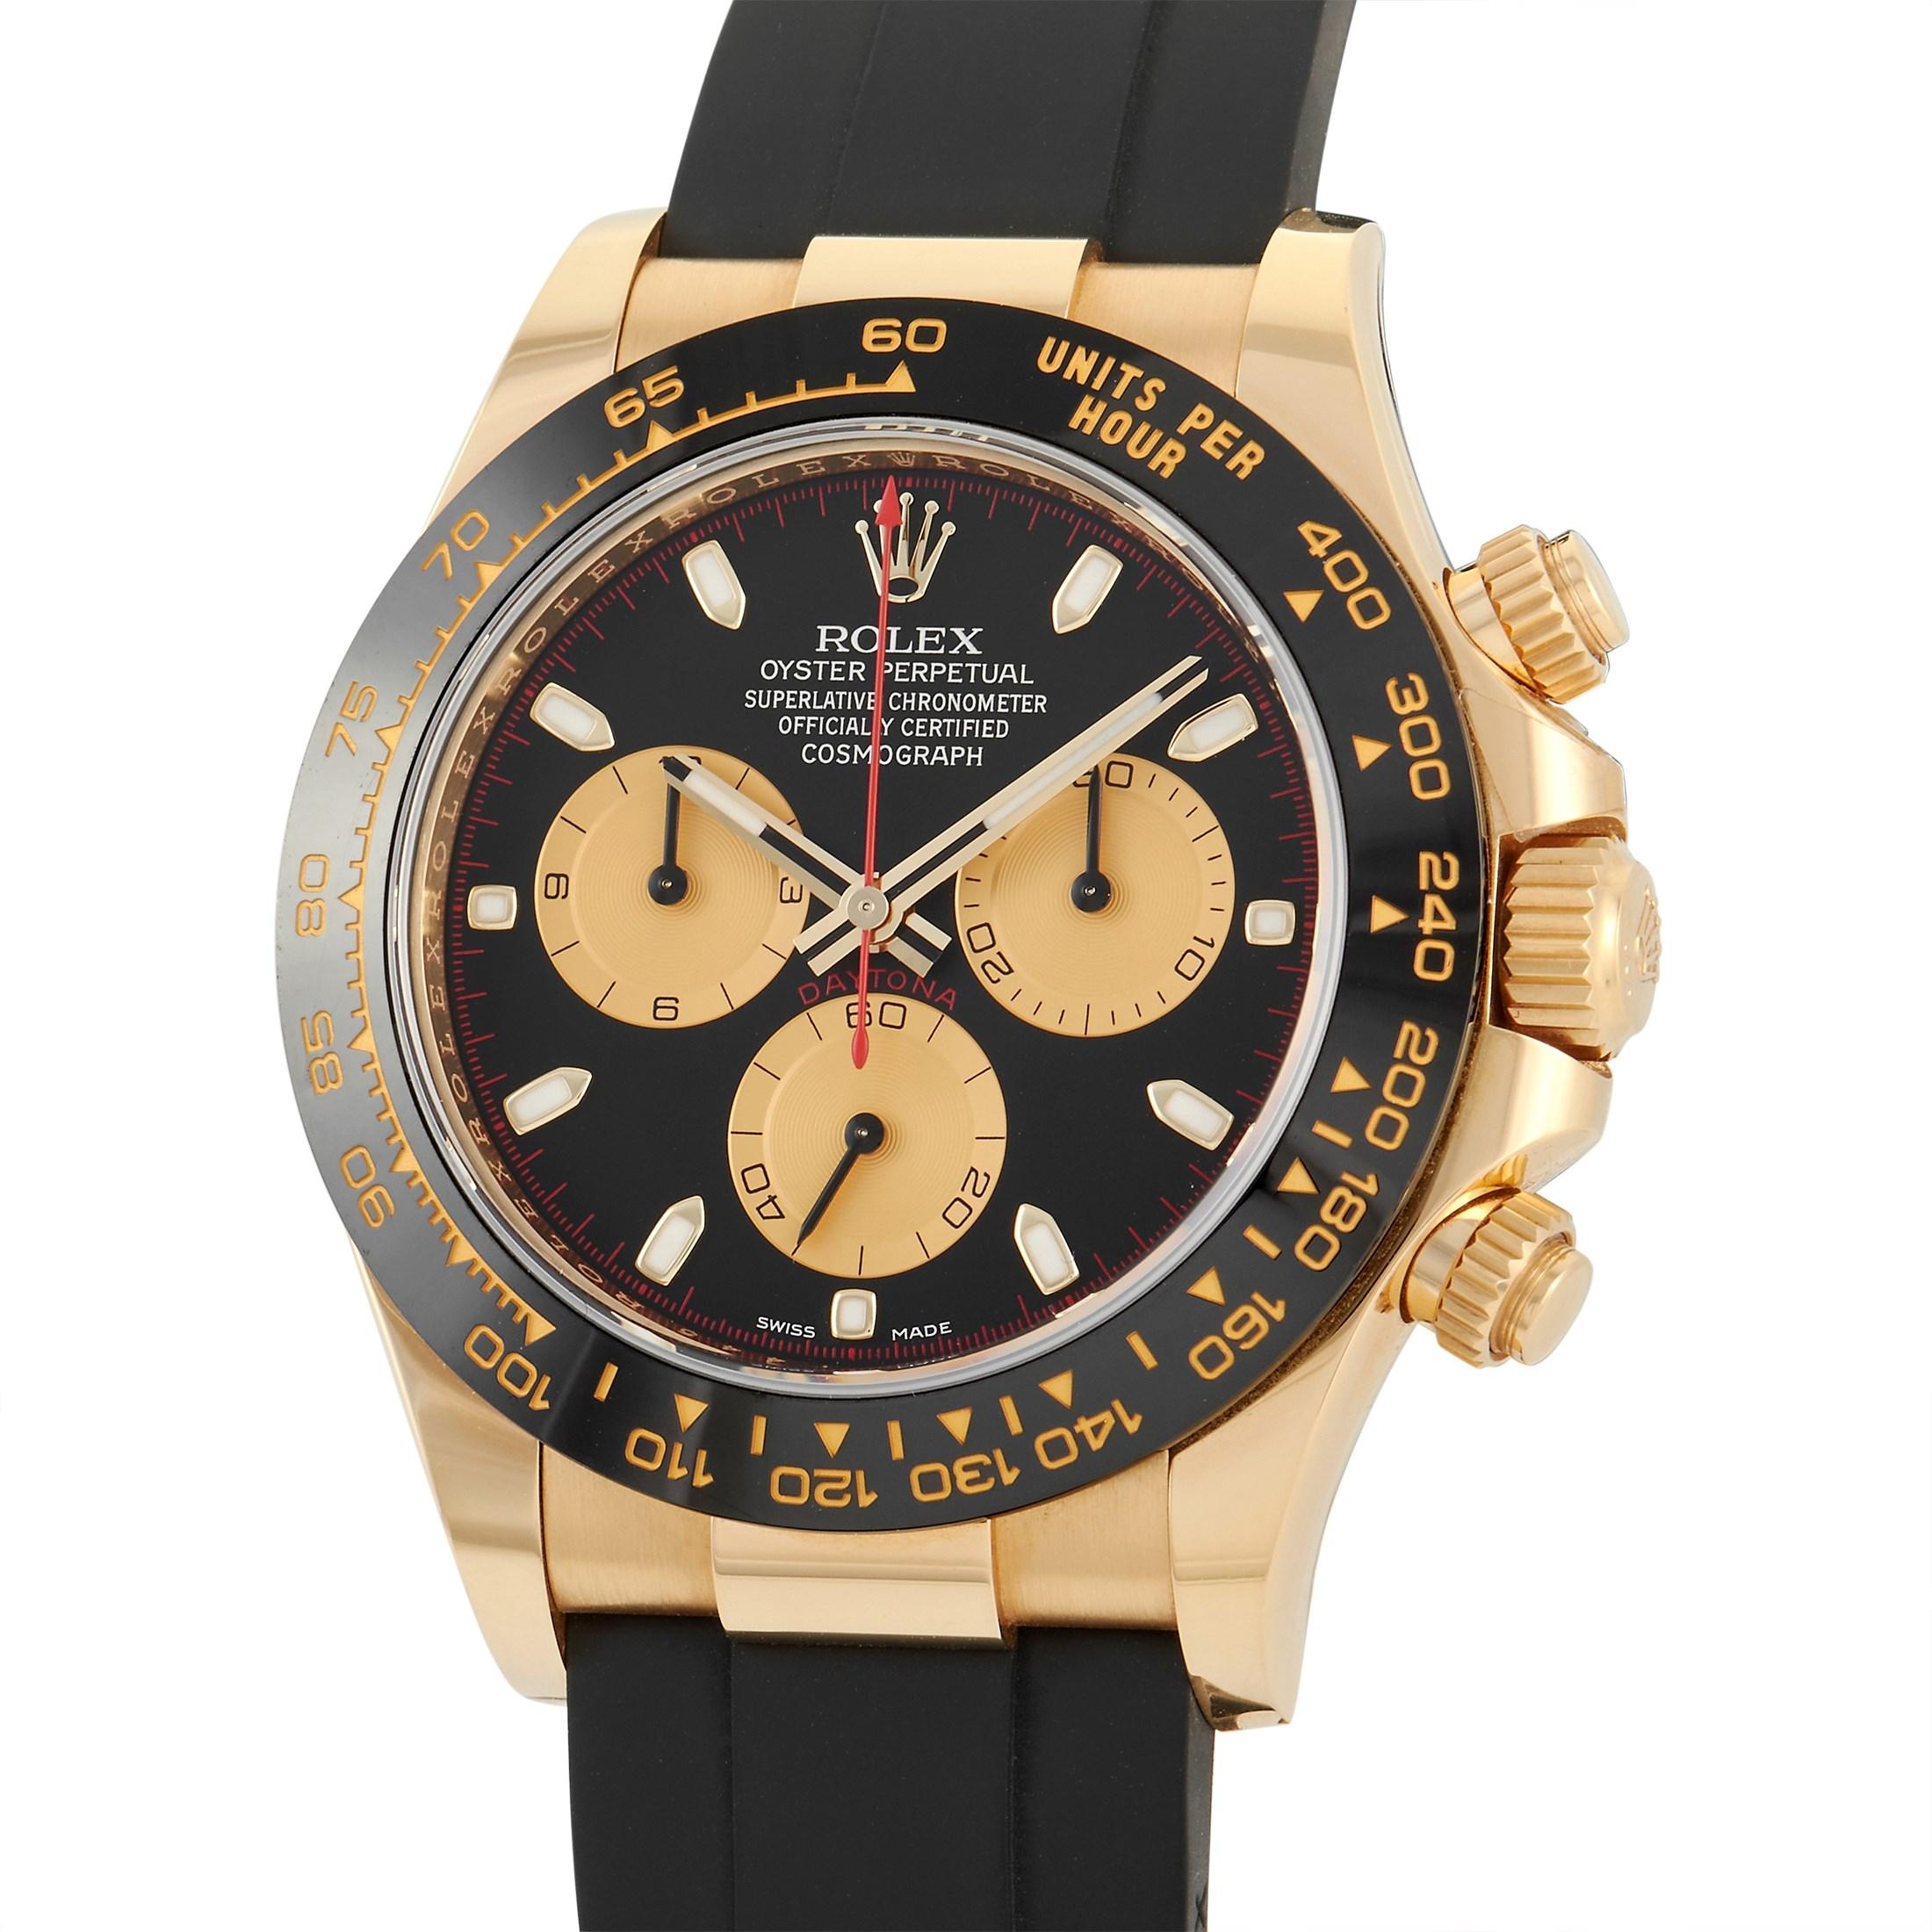 You'll easily find yourself coming back, again and again, to this striking Daytona. The Rolex Cosmograph Daytona Black Dial Oysterflex Chronograph Watch 116518LN features a high-contrast gold and black color scheme and an impressive play on